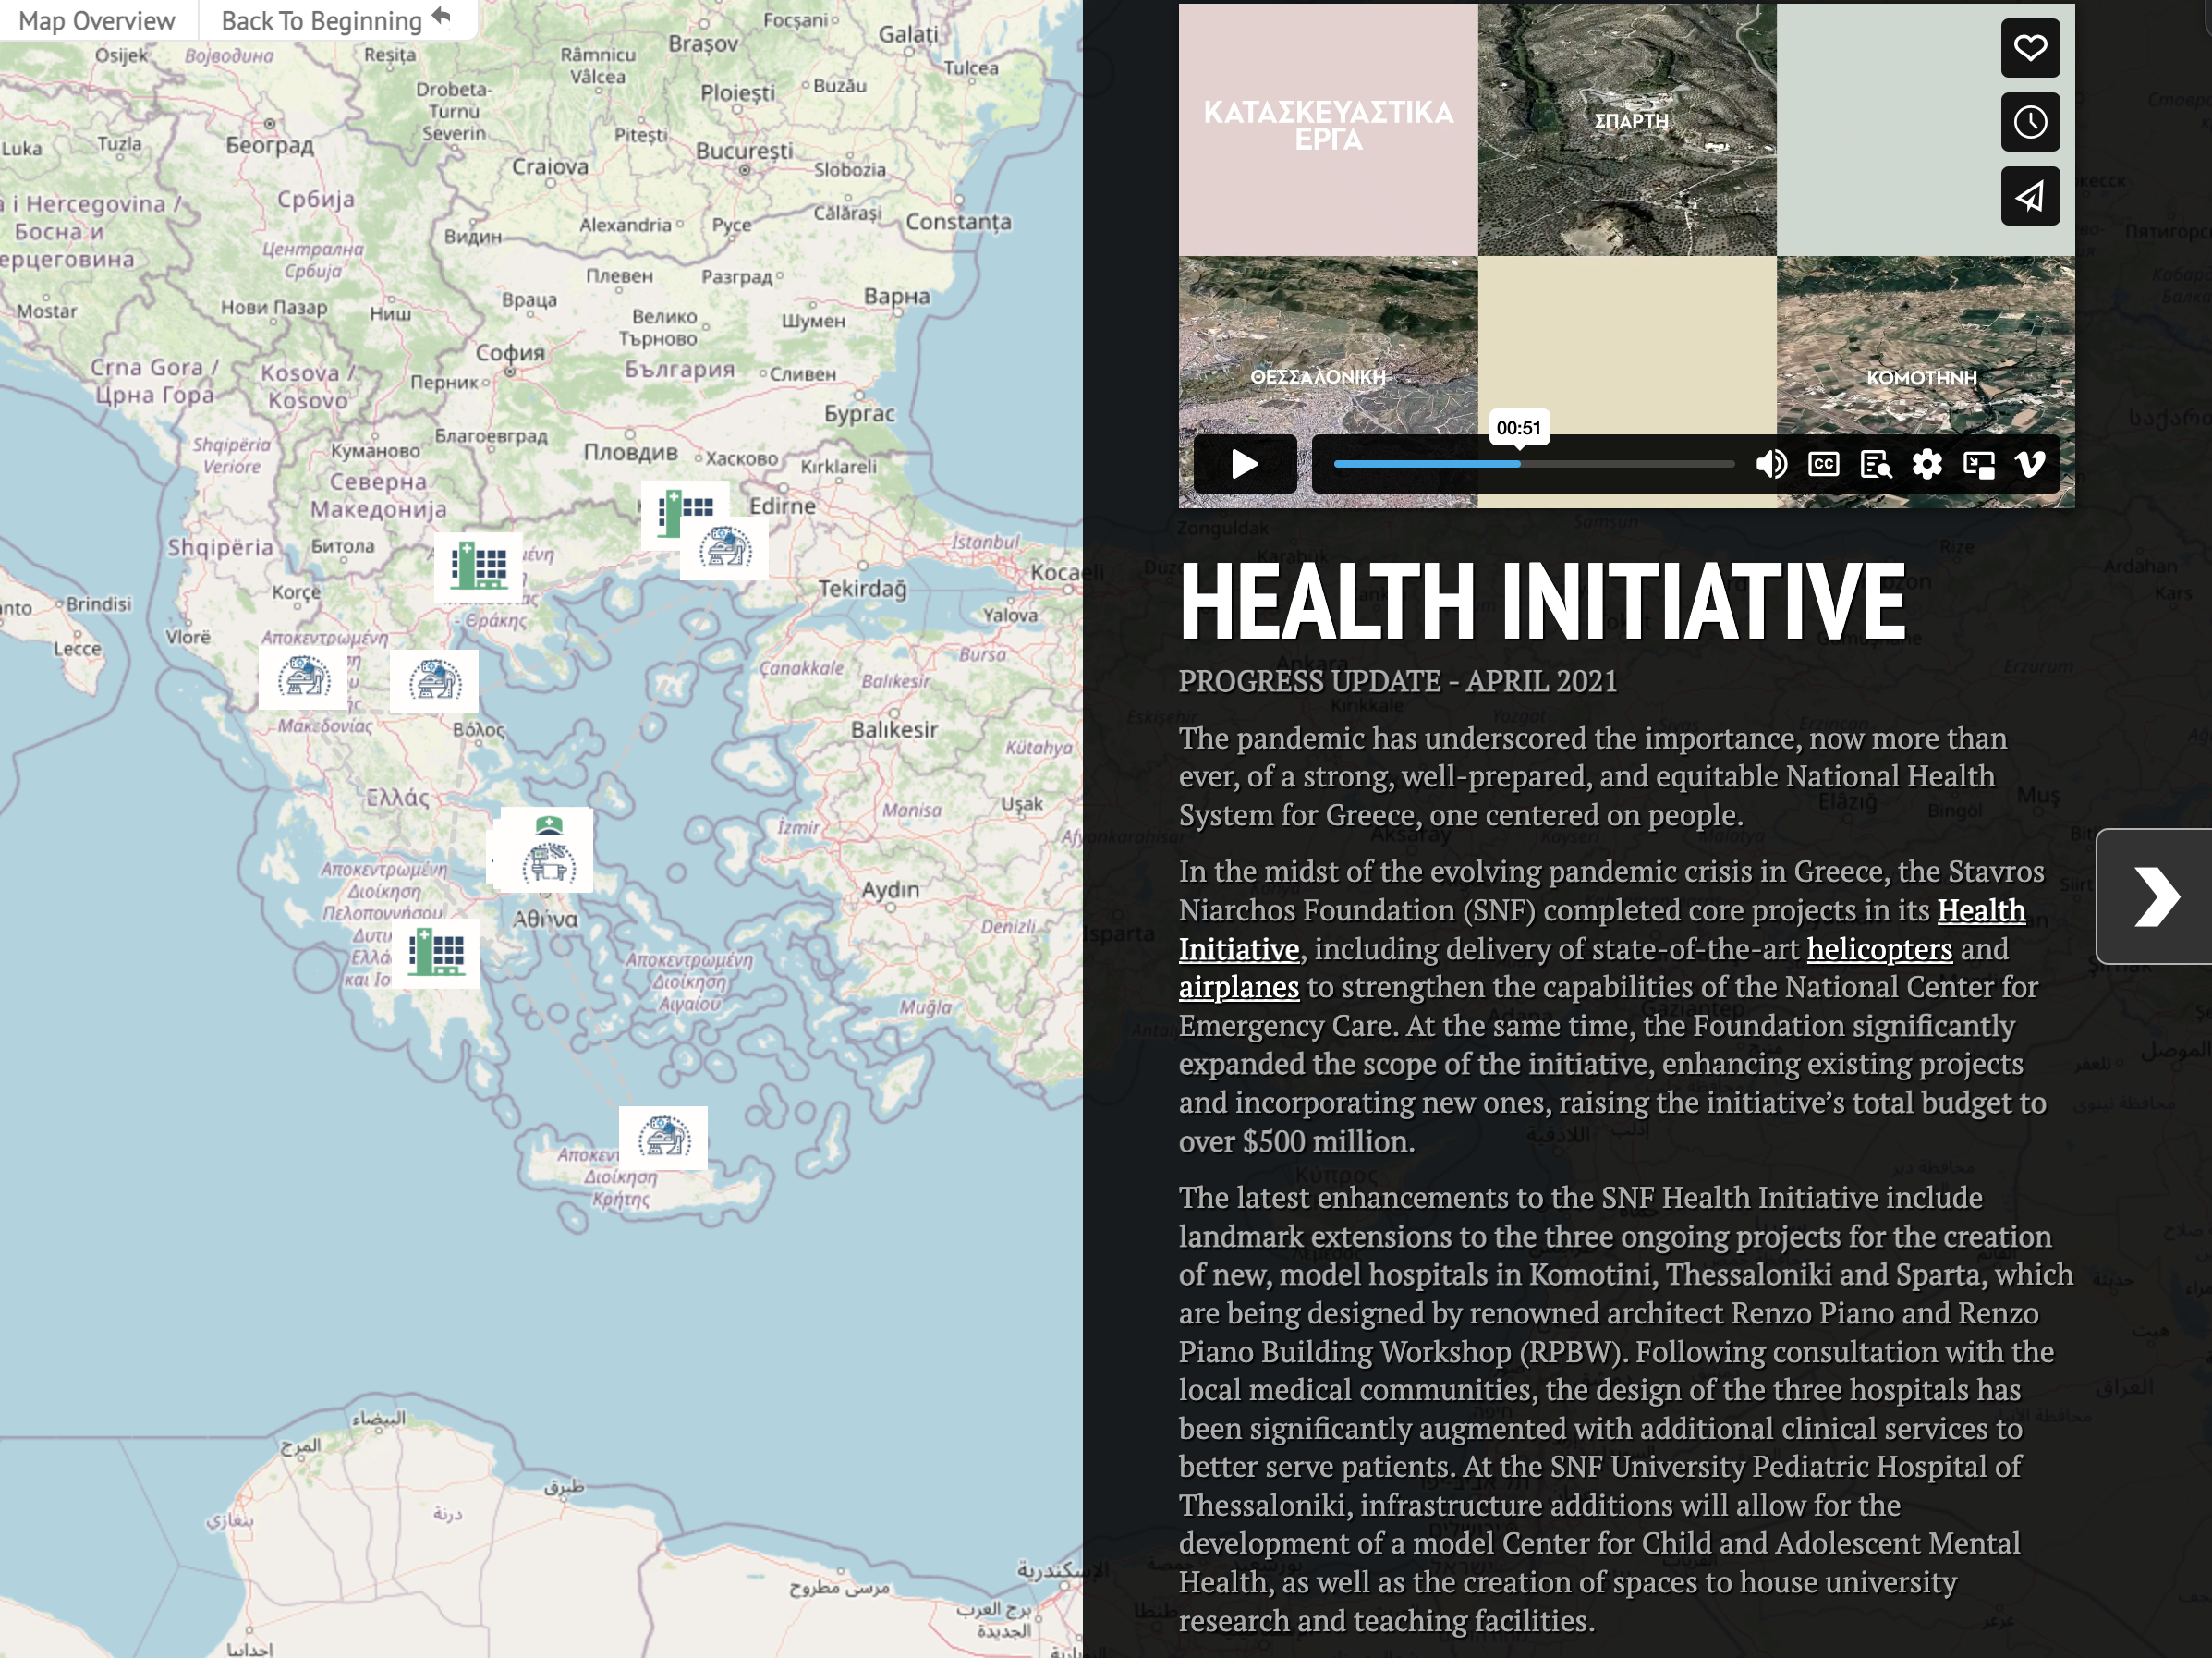 Figure 1.3 - Health initiatives across Greece are shared as an interactive storymap. Source: The Stavros Niarchos Foundation